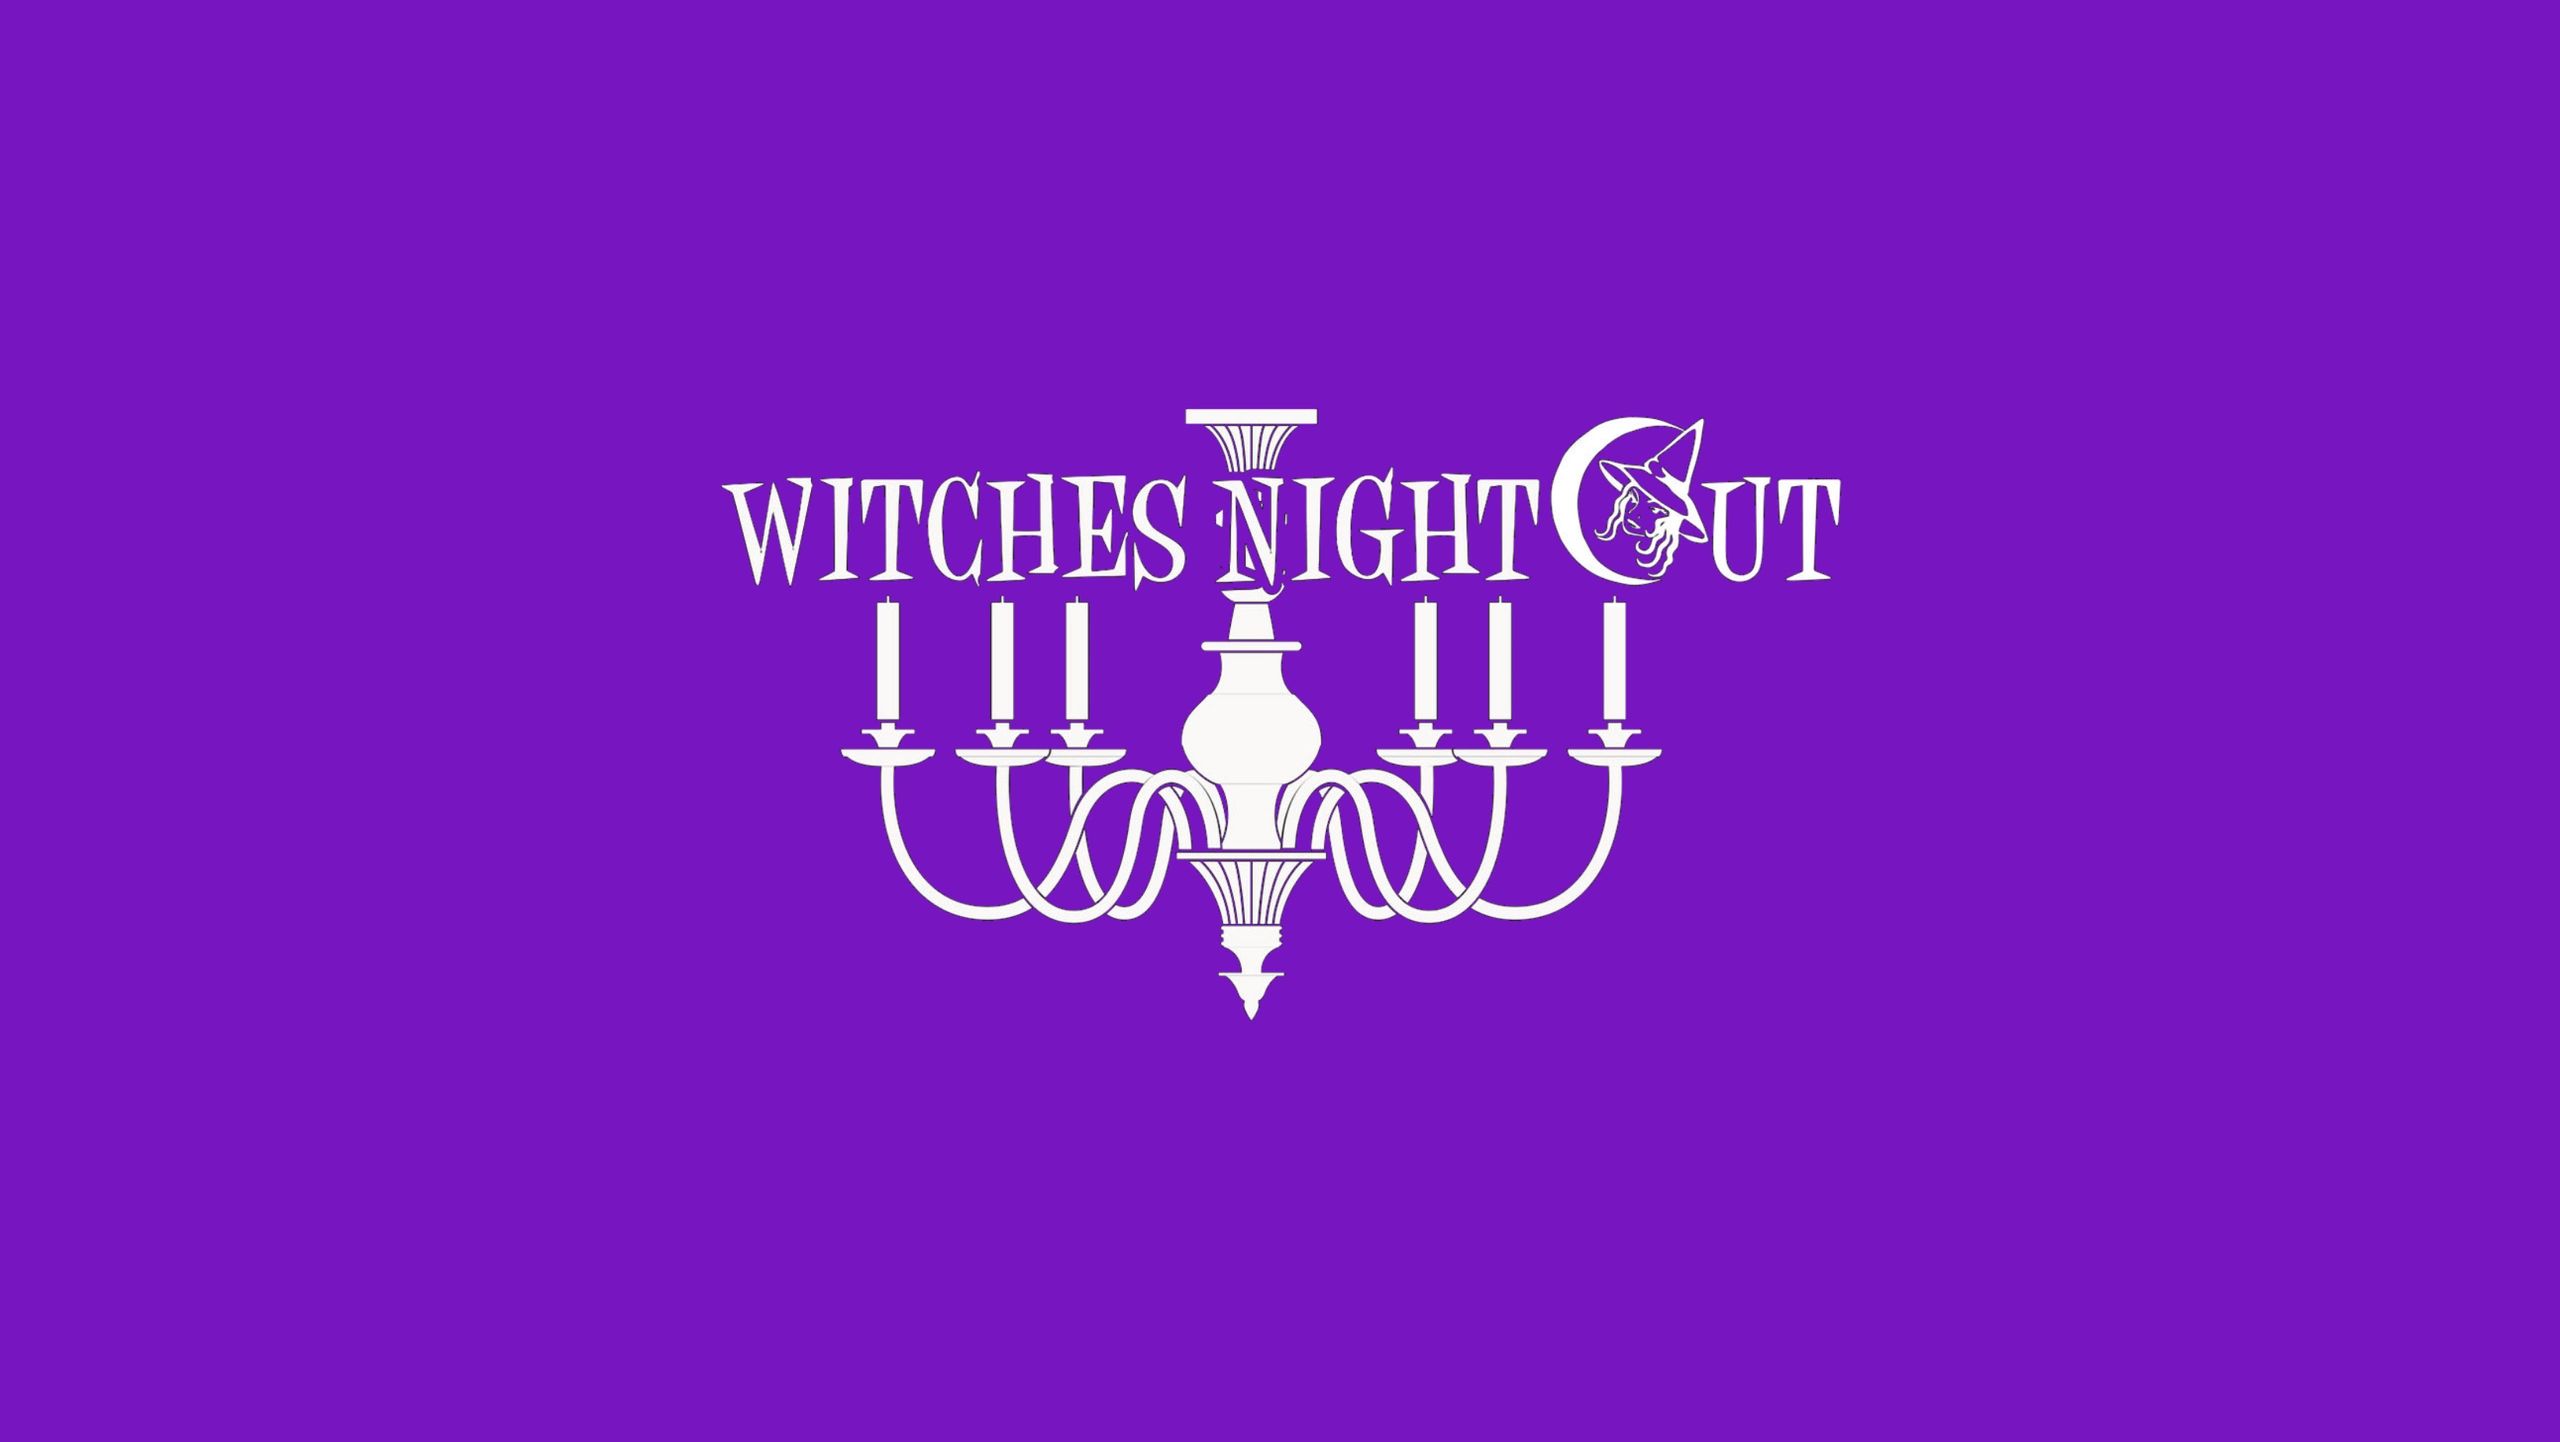 Witches Night Out charitable event